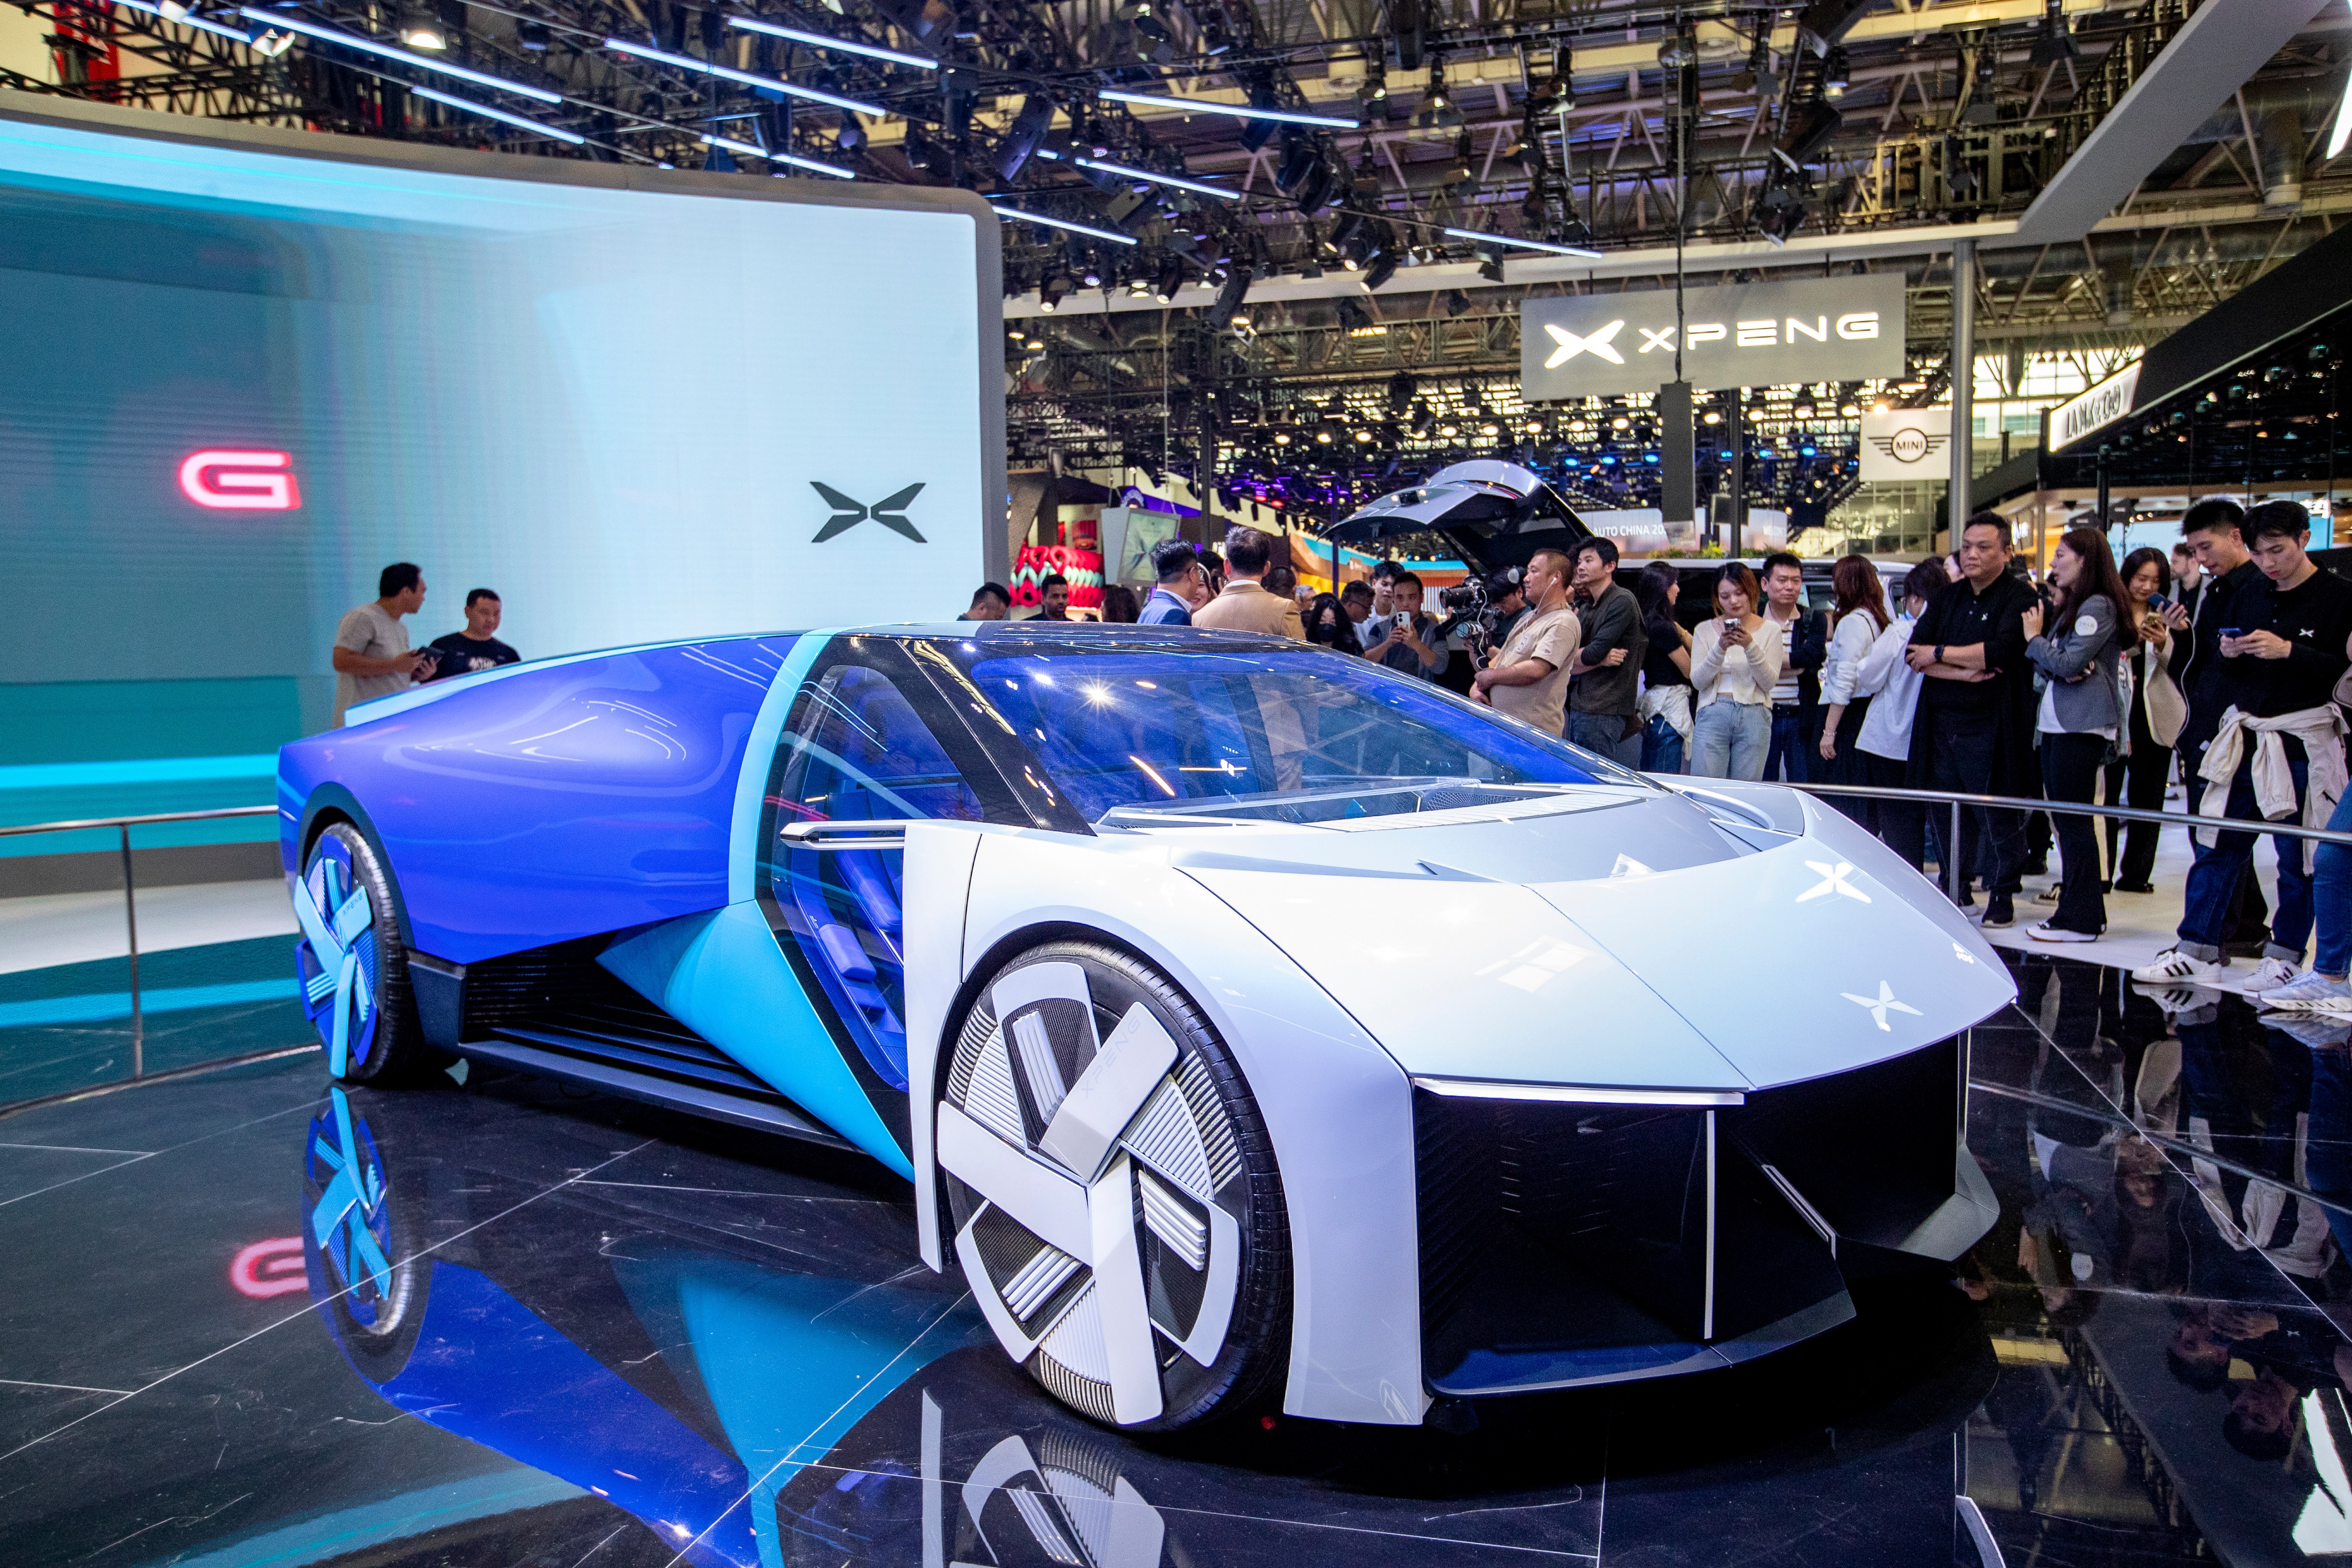 Cars by Chinese makers such as XPeng are cheaper and more innovative, a western investor said